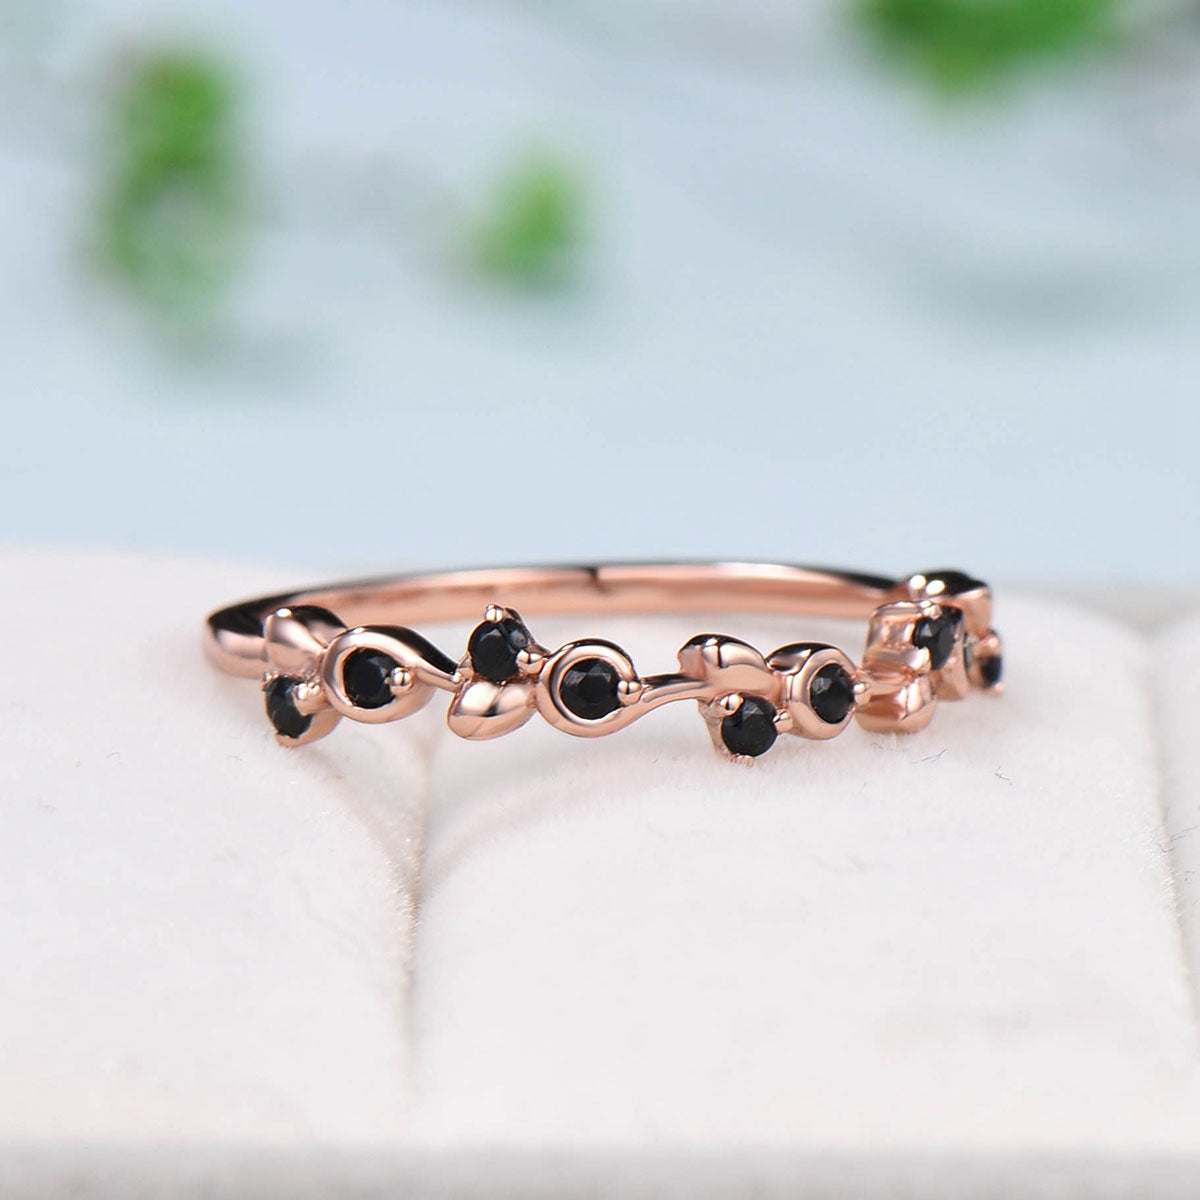 Retro Queen Wedding Band Vintage Black Spinel Stacking Ring For Women Rose Gold Art Deco fiancée Wedding Ring Anniversary Gift - PENFINE